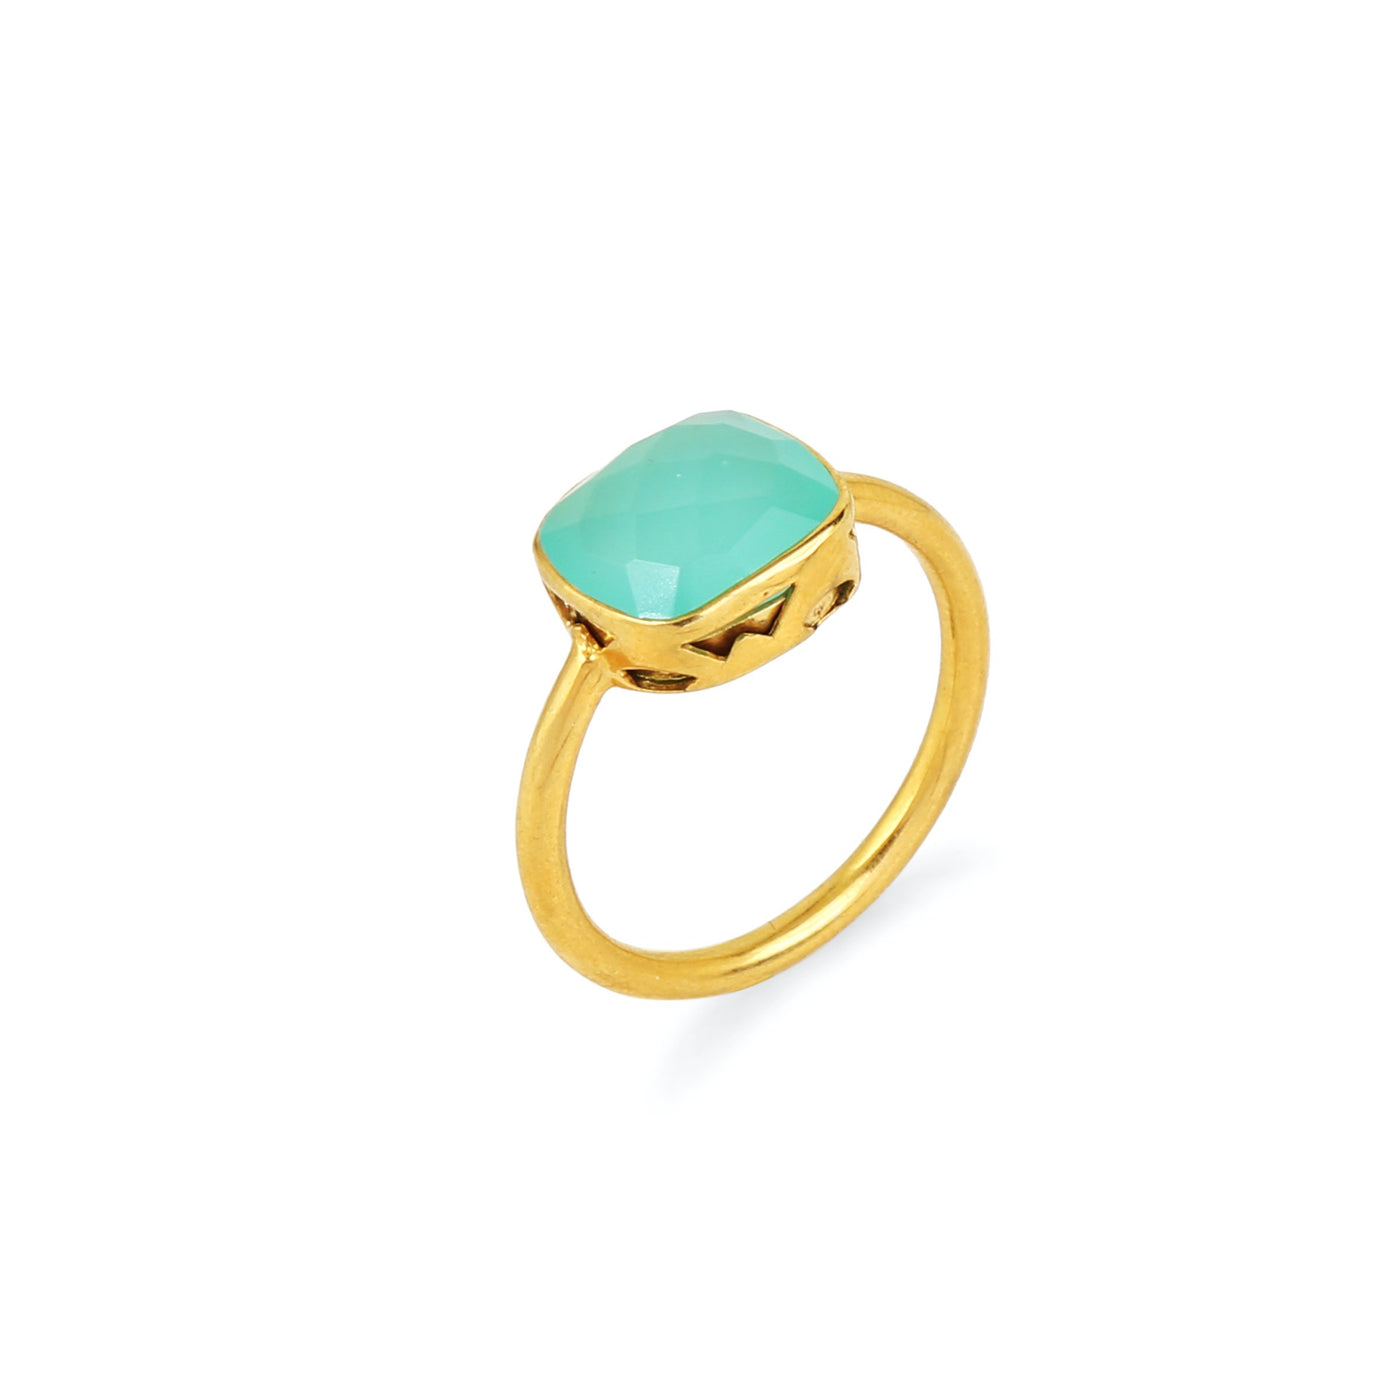 Jane handcrafted ring